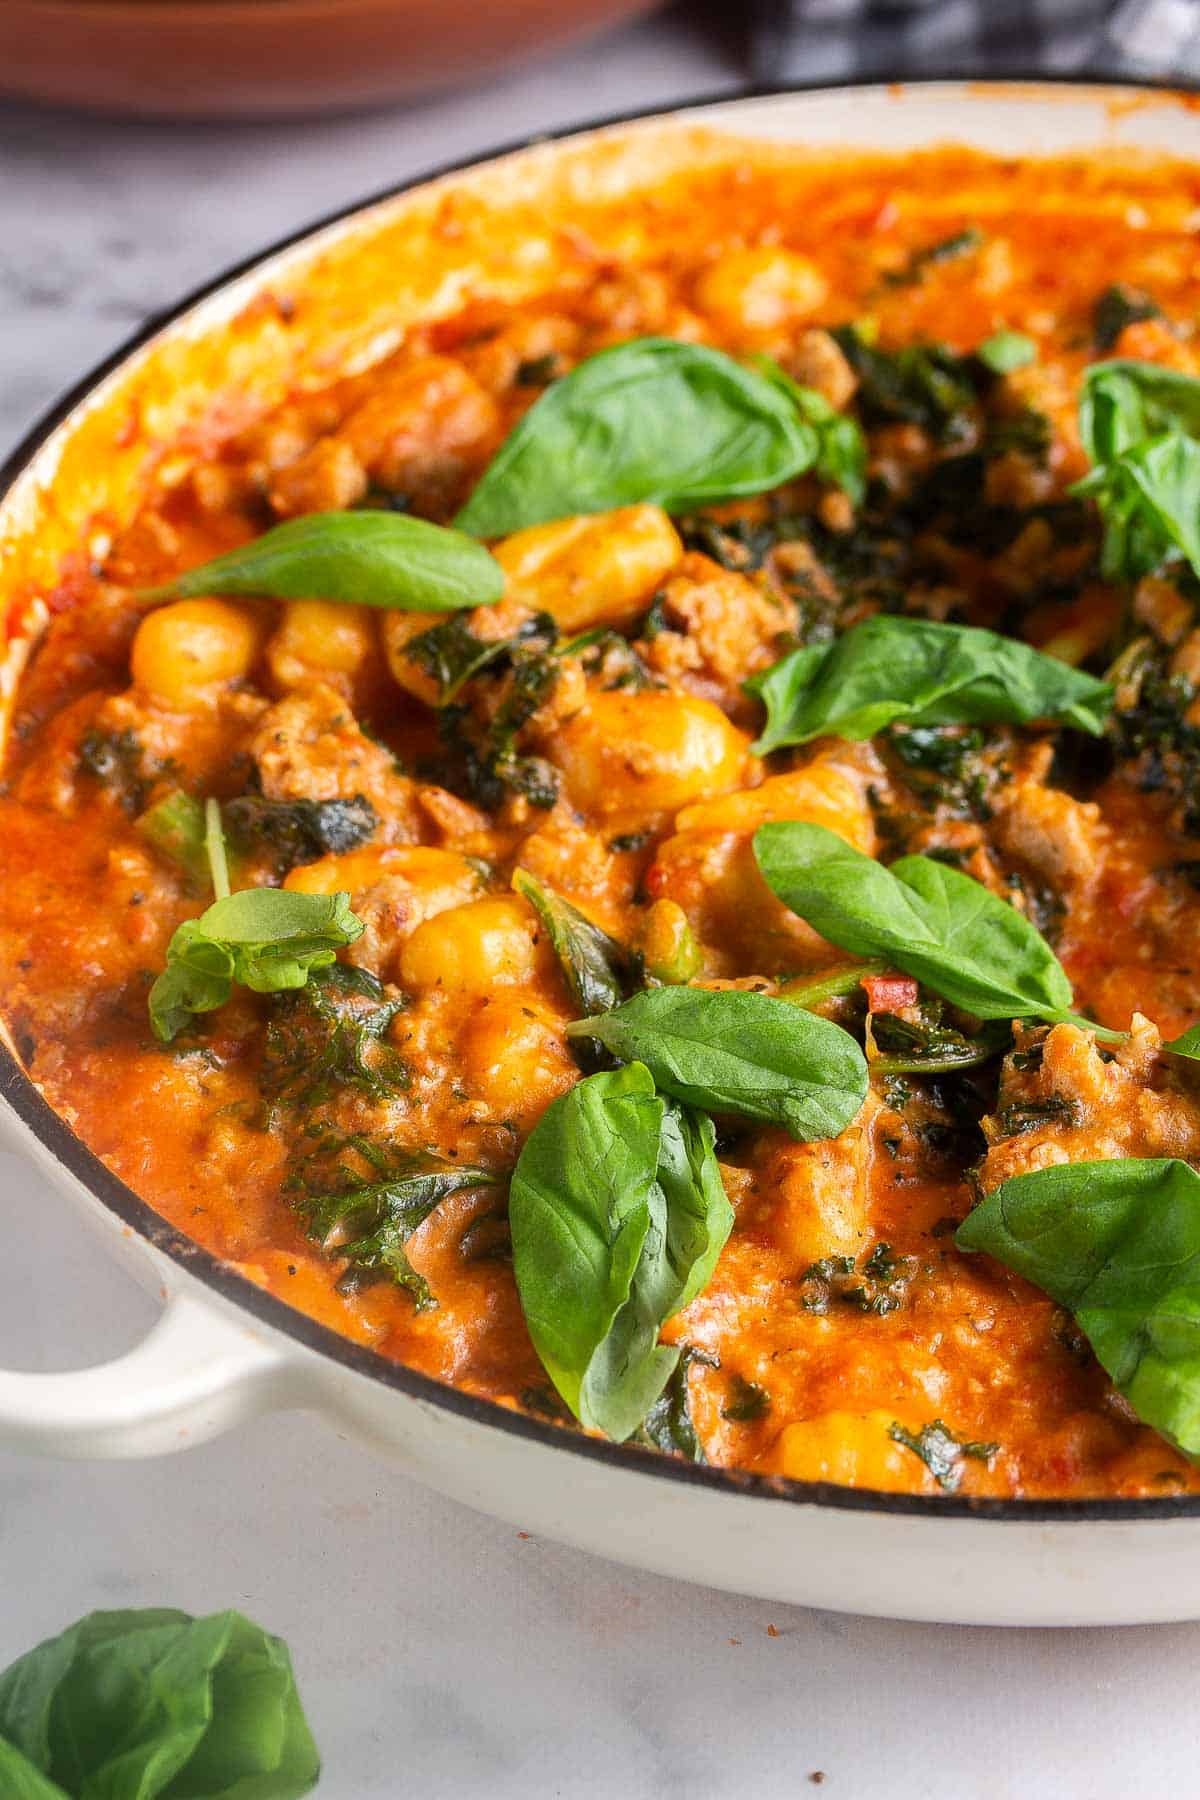 Skillet of gnocchi in sauce topped with basil